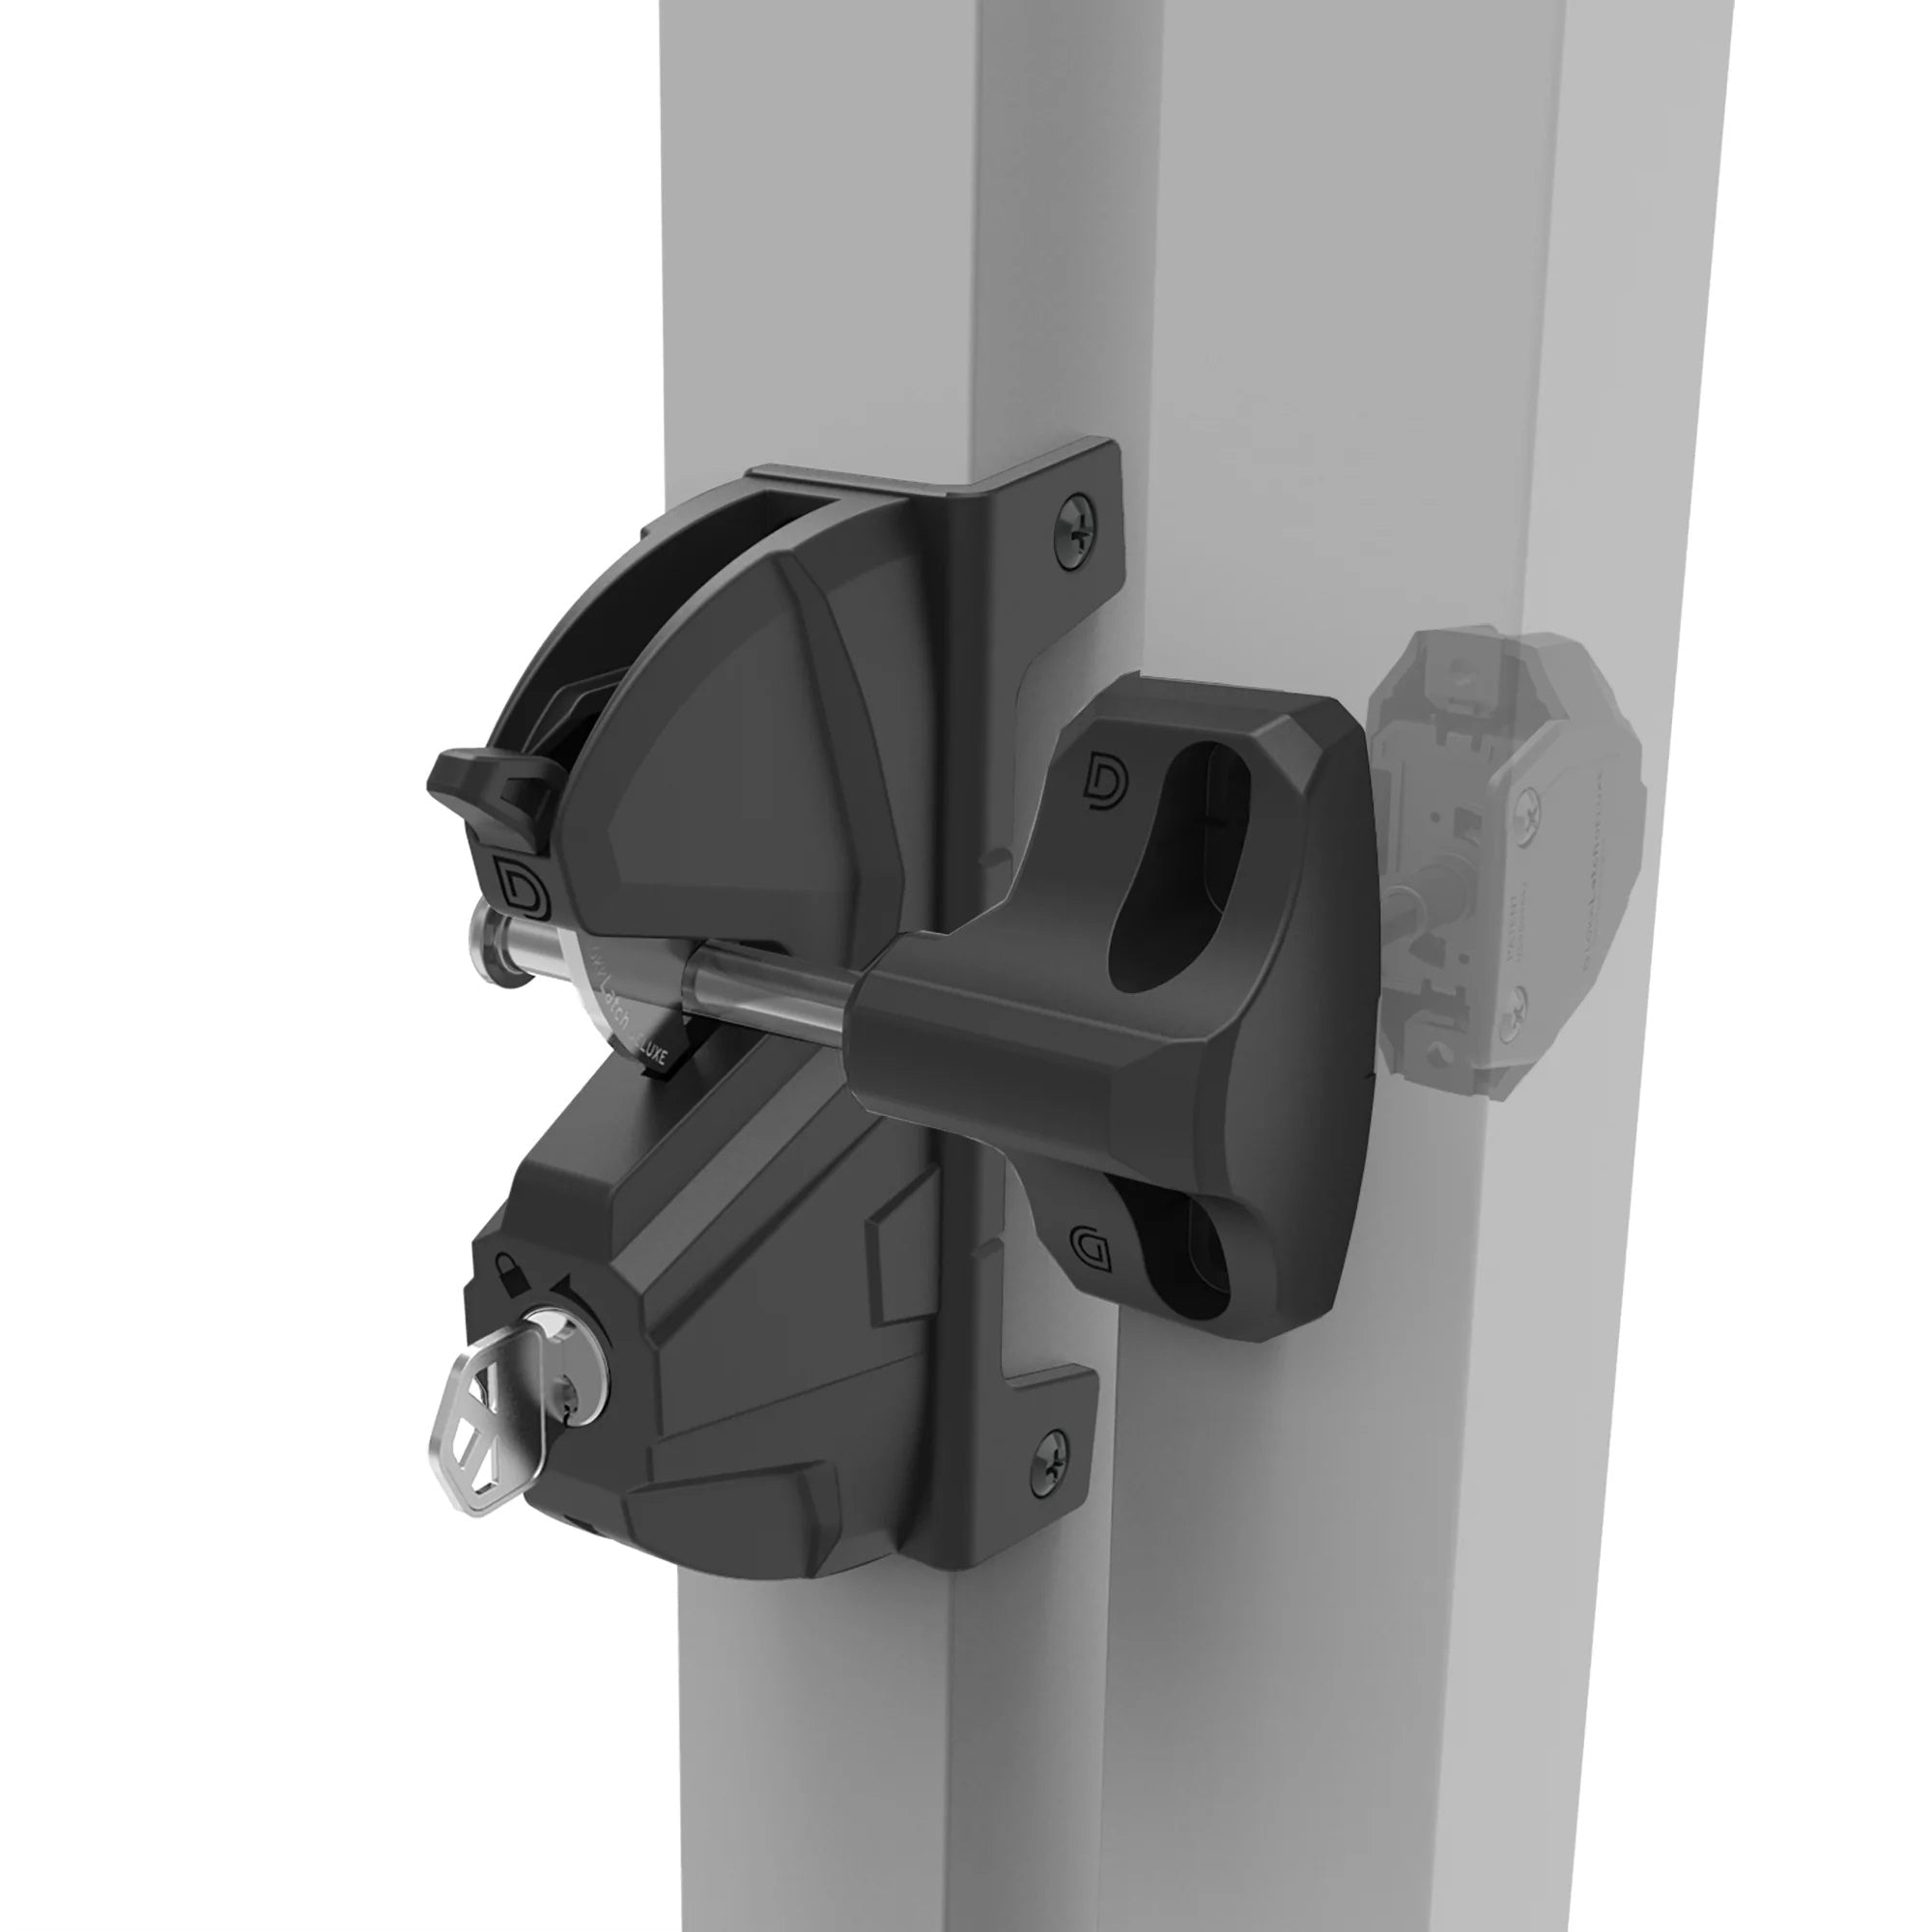 Privacy and Security Gate Latch - For Square Post Gates up to 6" - Gate Gap 1" - Multiple Finishes Available - Sold Individually